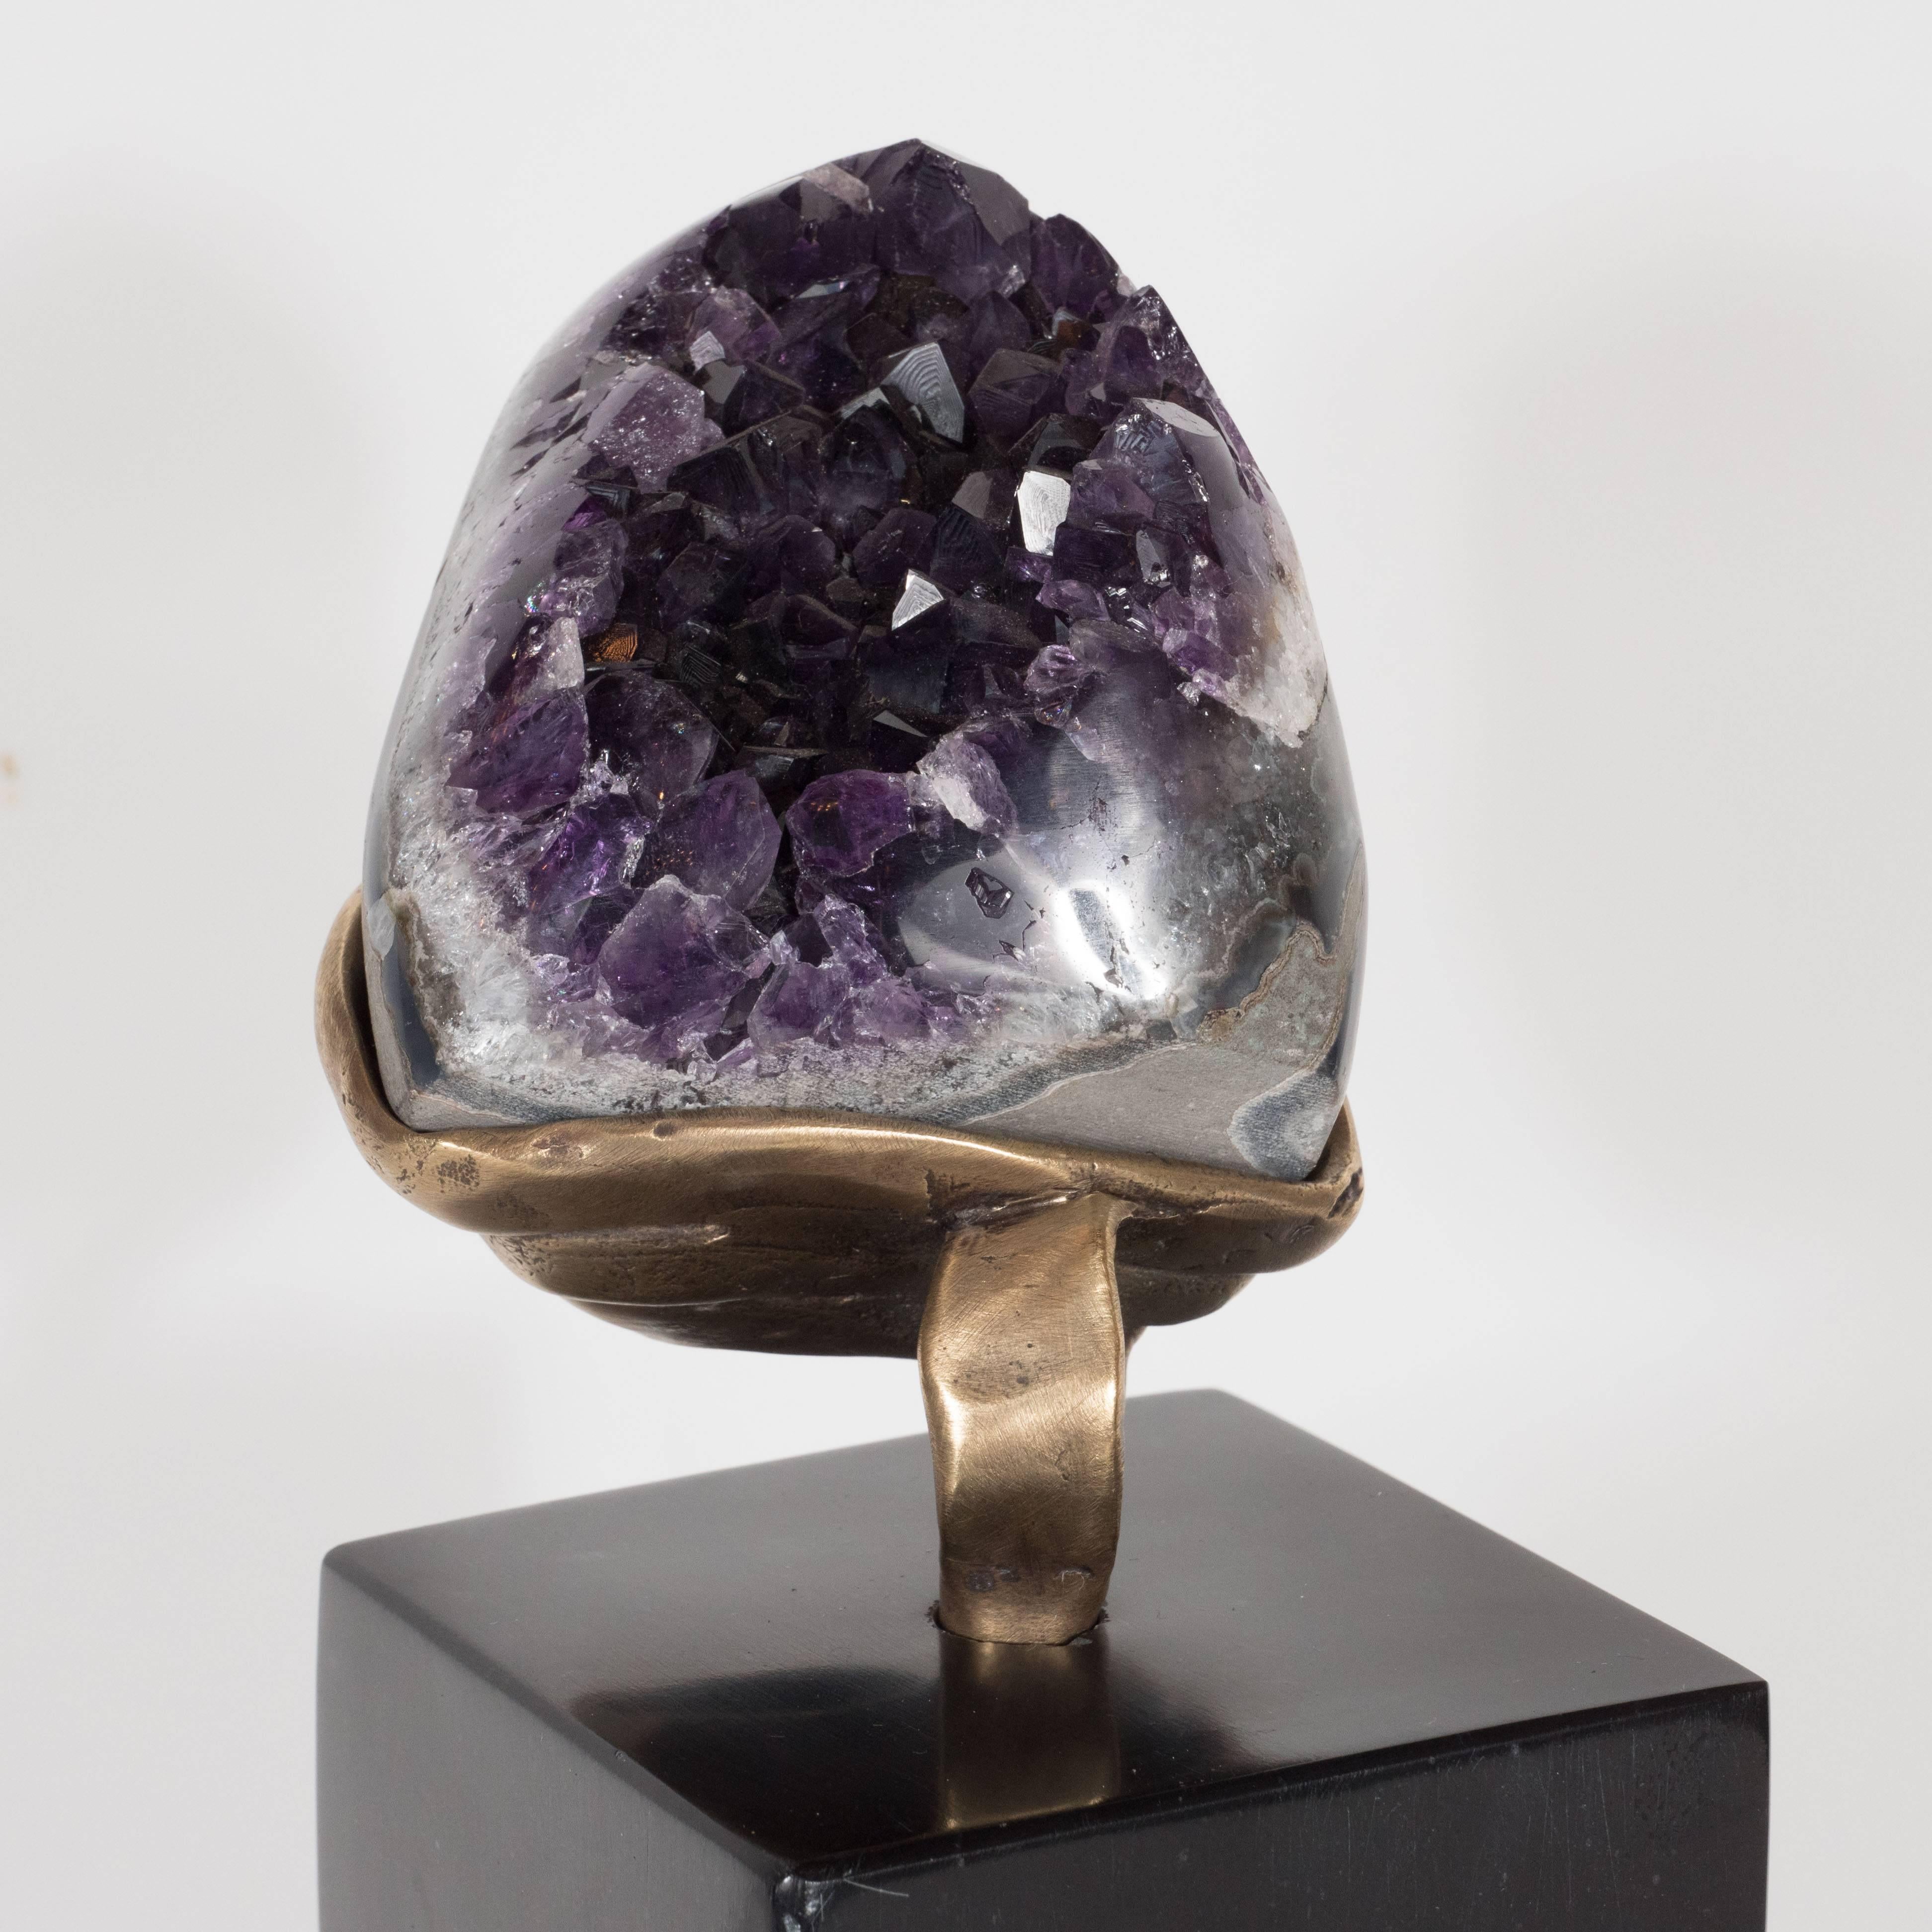 Organic Modern Amethyst Geode with a Sculptural Bronze Display Stand and Black Marble Base